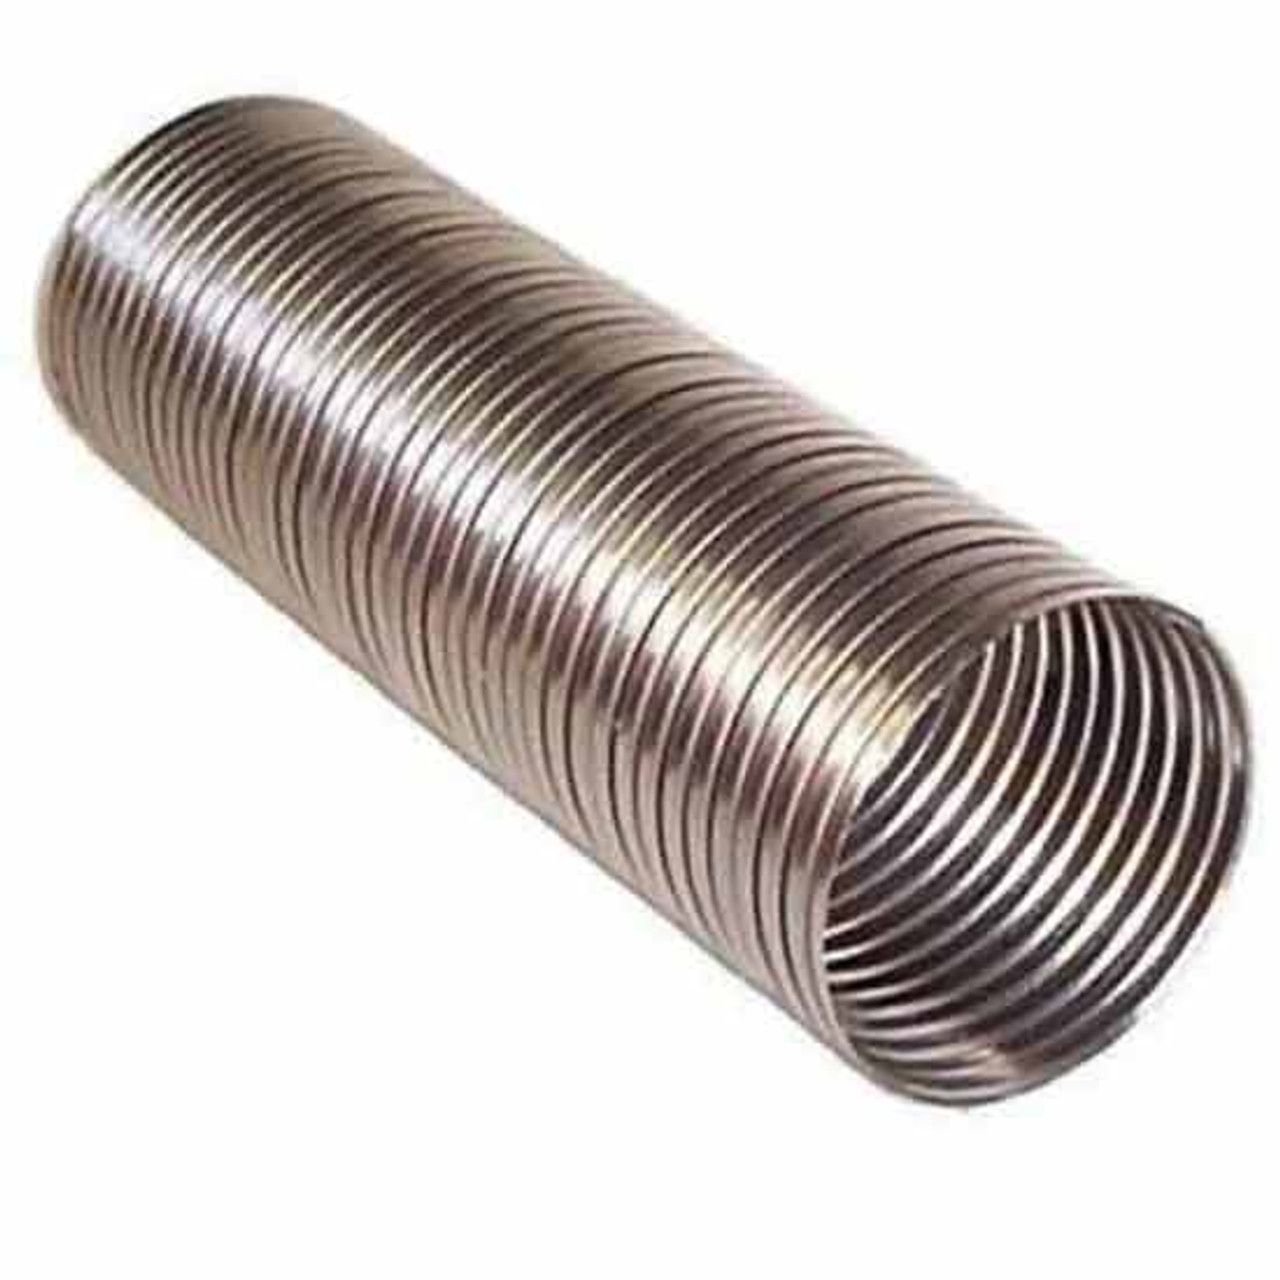 2.375 (2 3/8 in.) x 10 x 14 Flex Pipe Exhaust Coupling Stainless Heavy  Duty